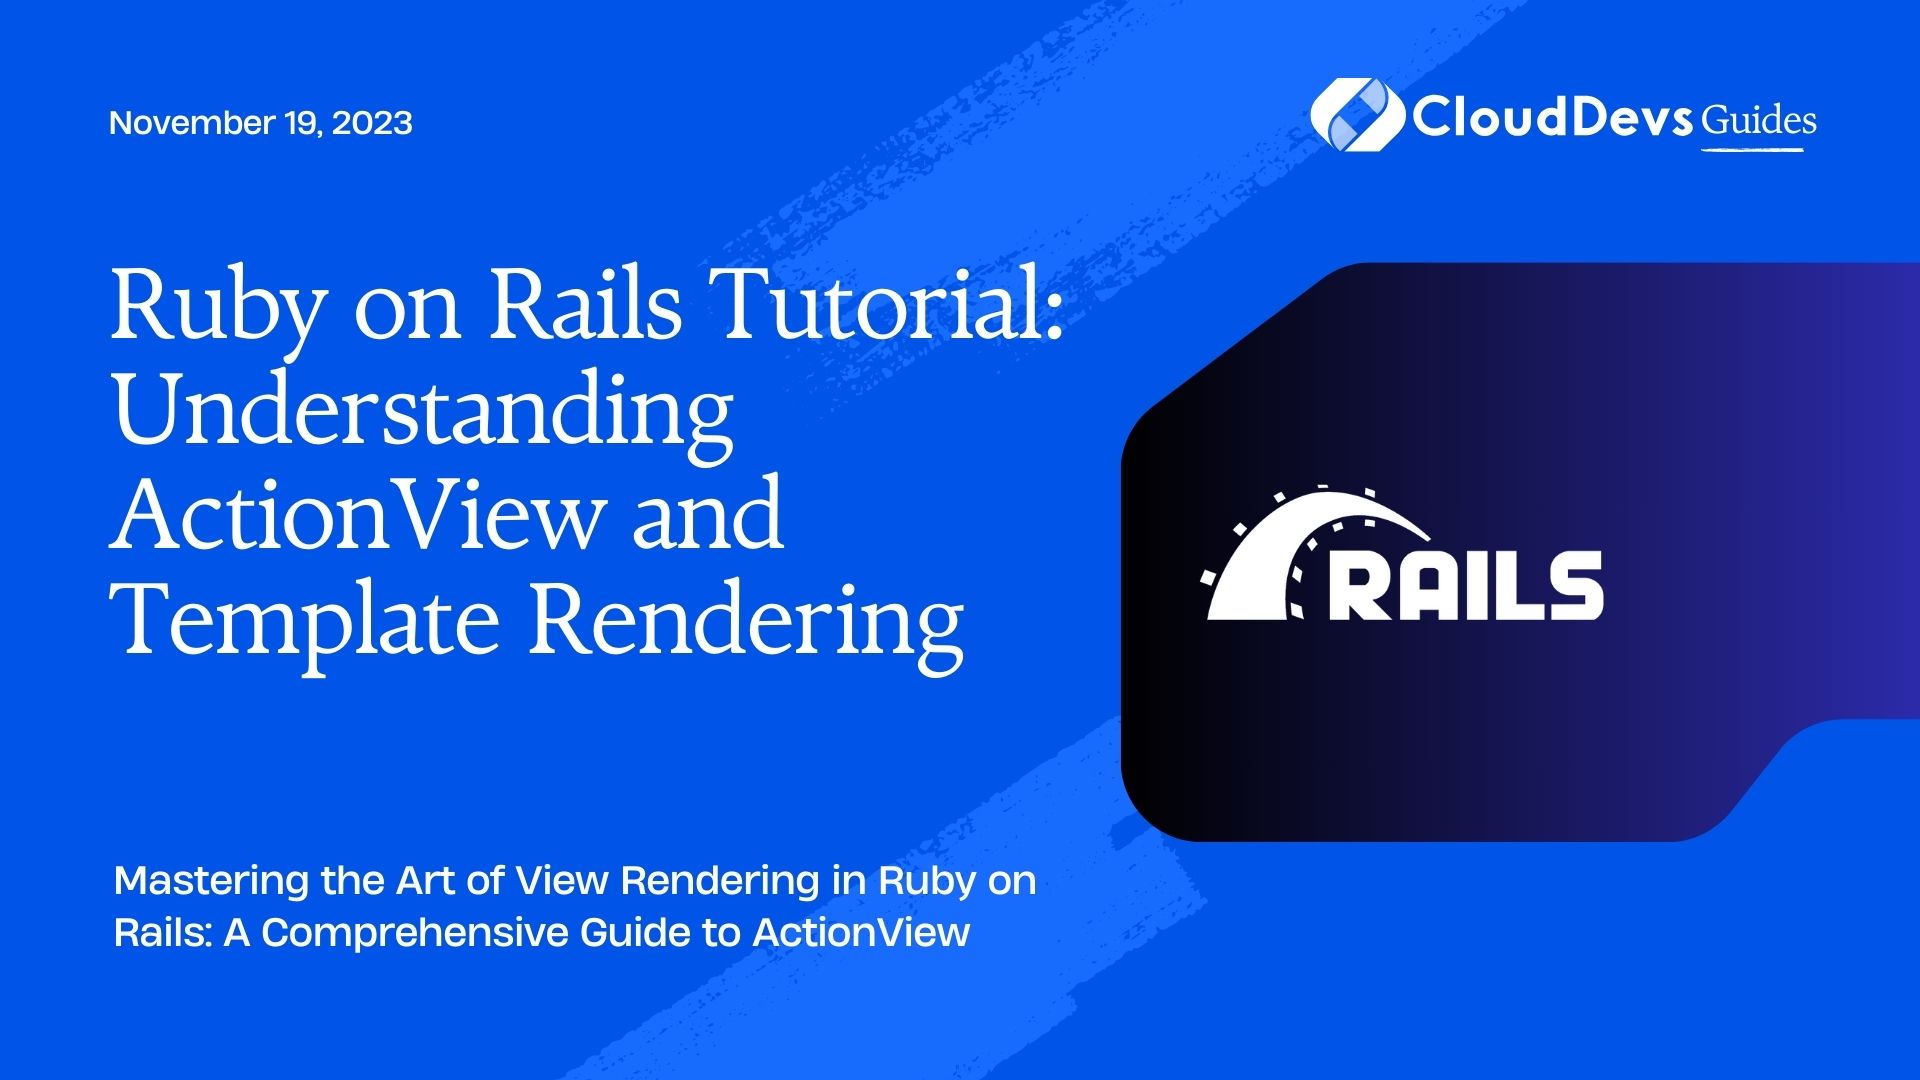 Ruby on Rails Tutorial: Understanding ActionView and Template Rendering